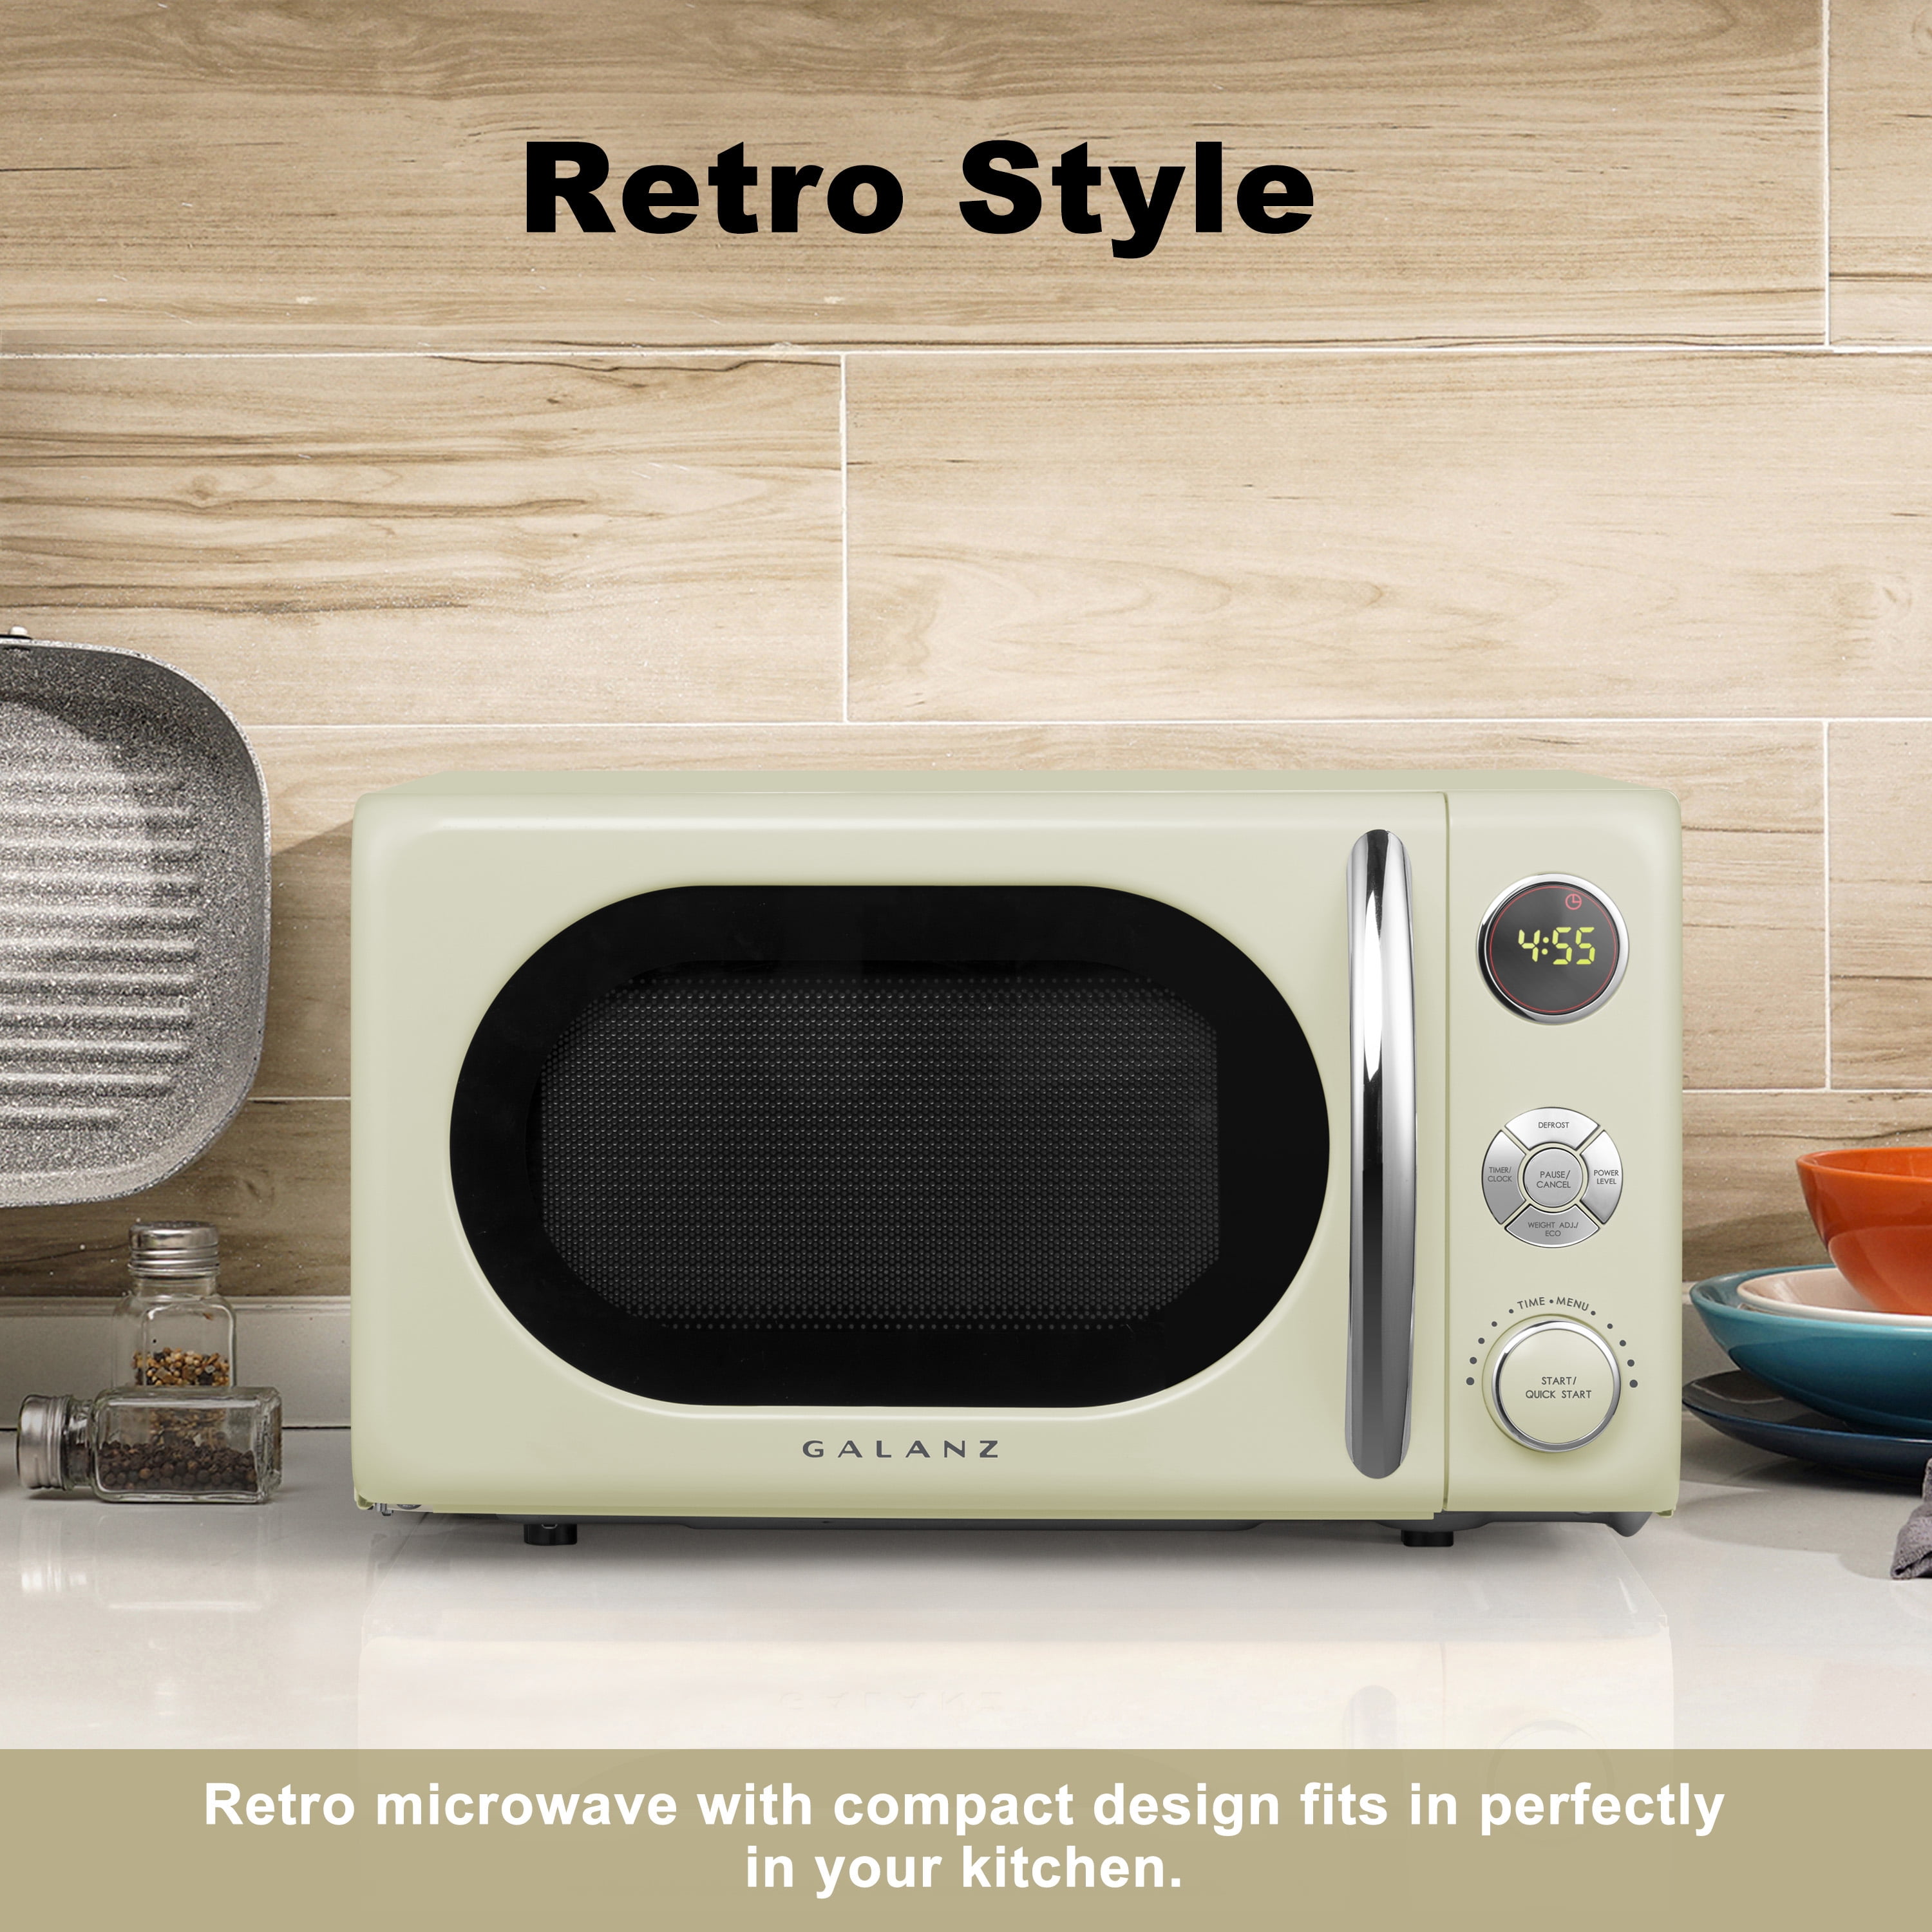 Retro-Style Microwave Shopping Inspiration